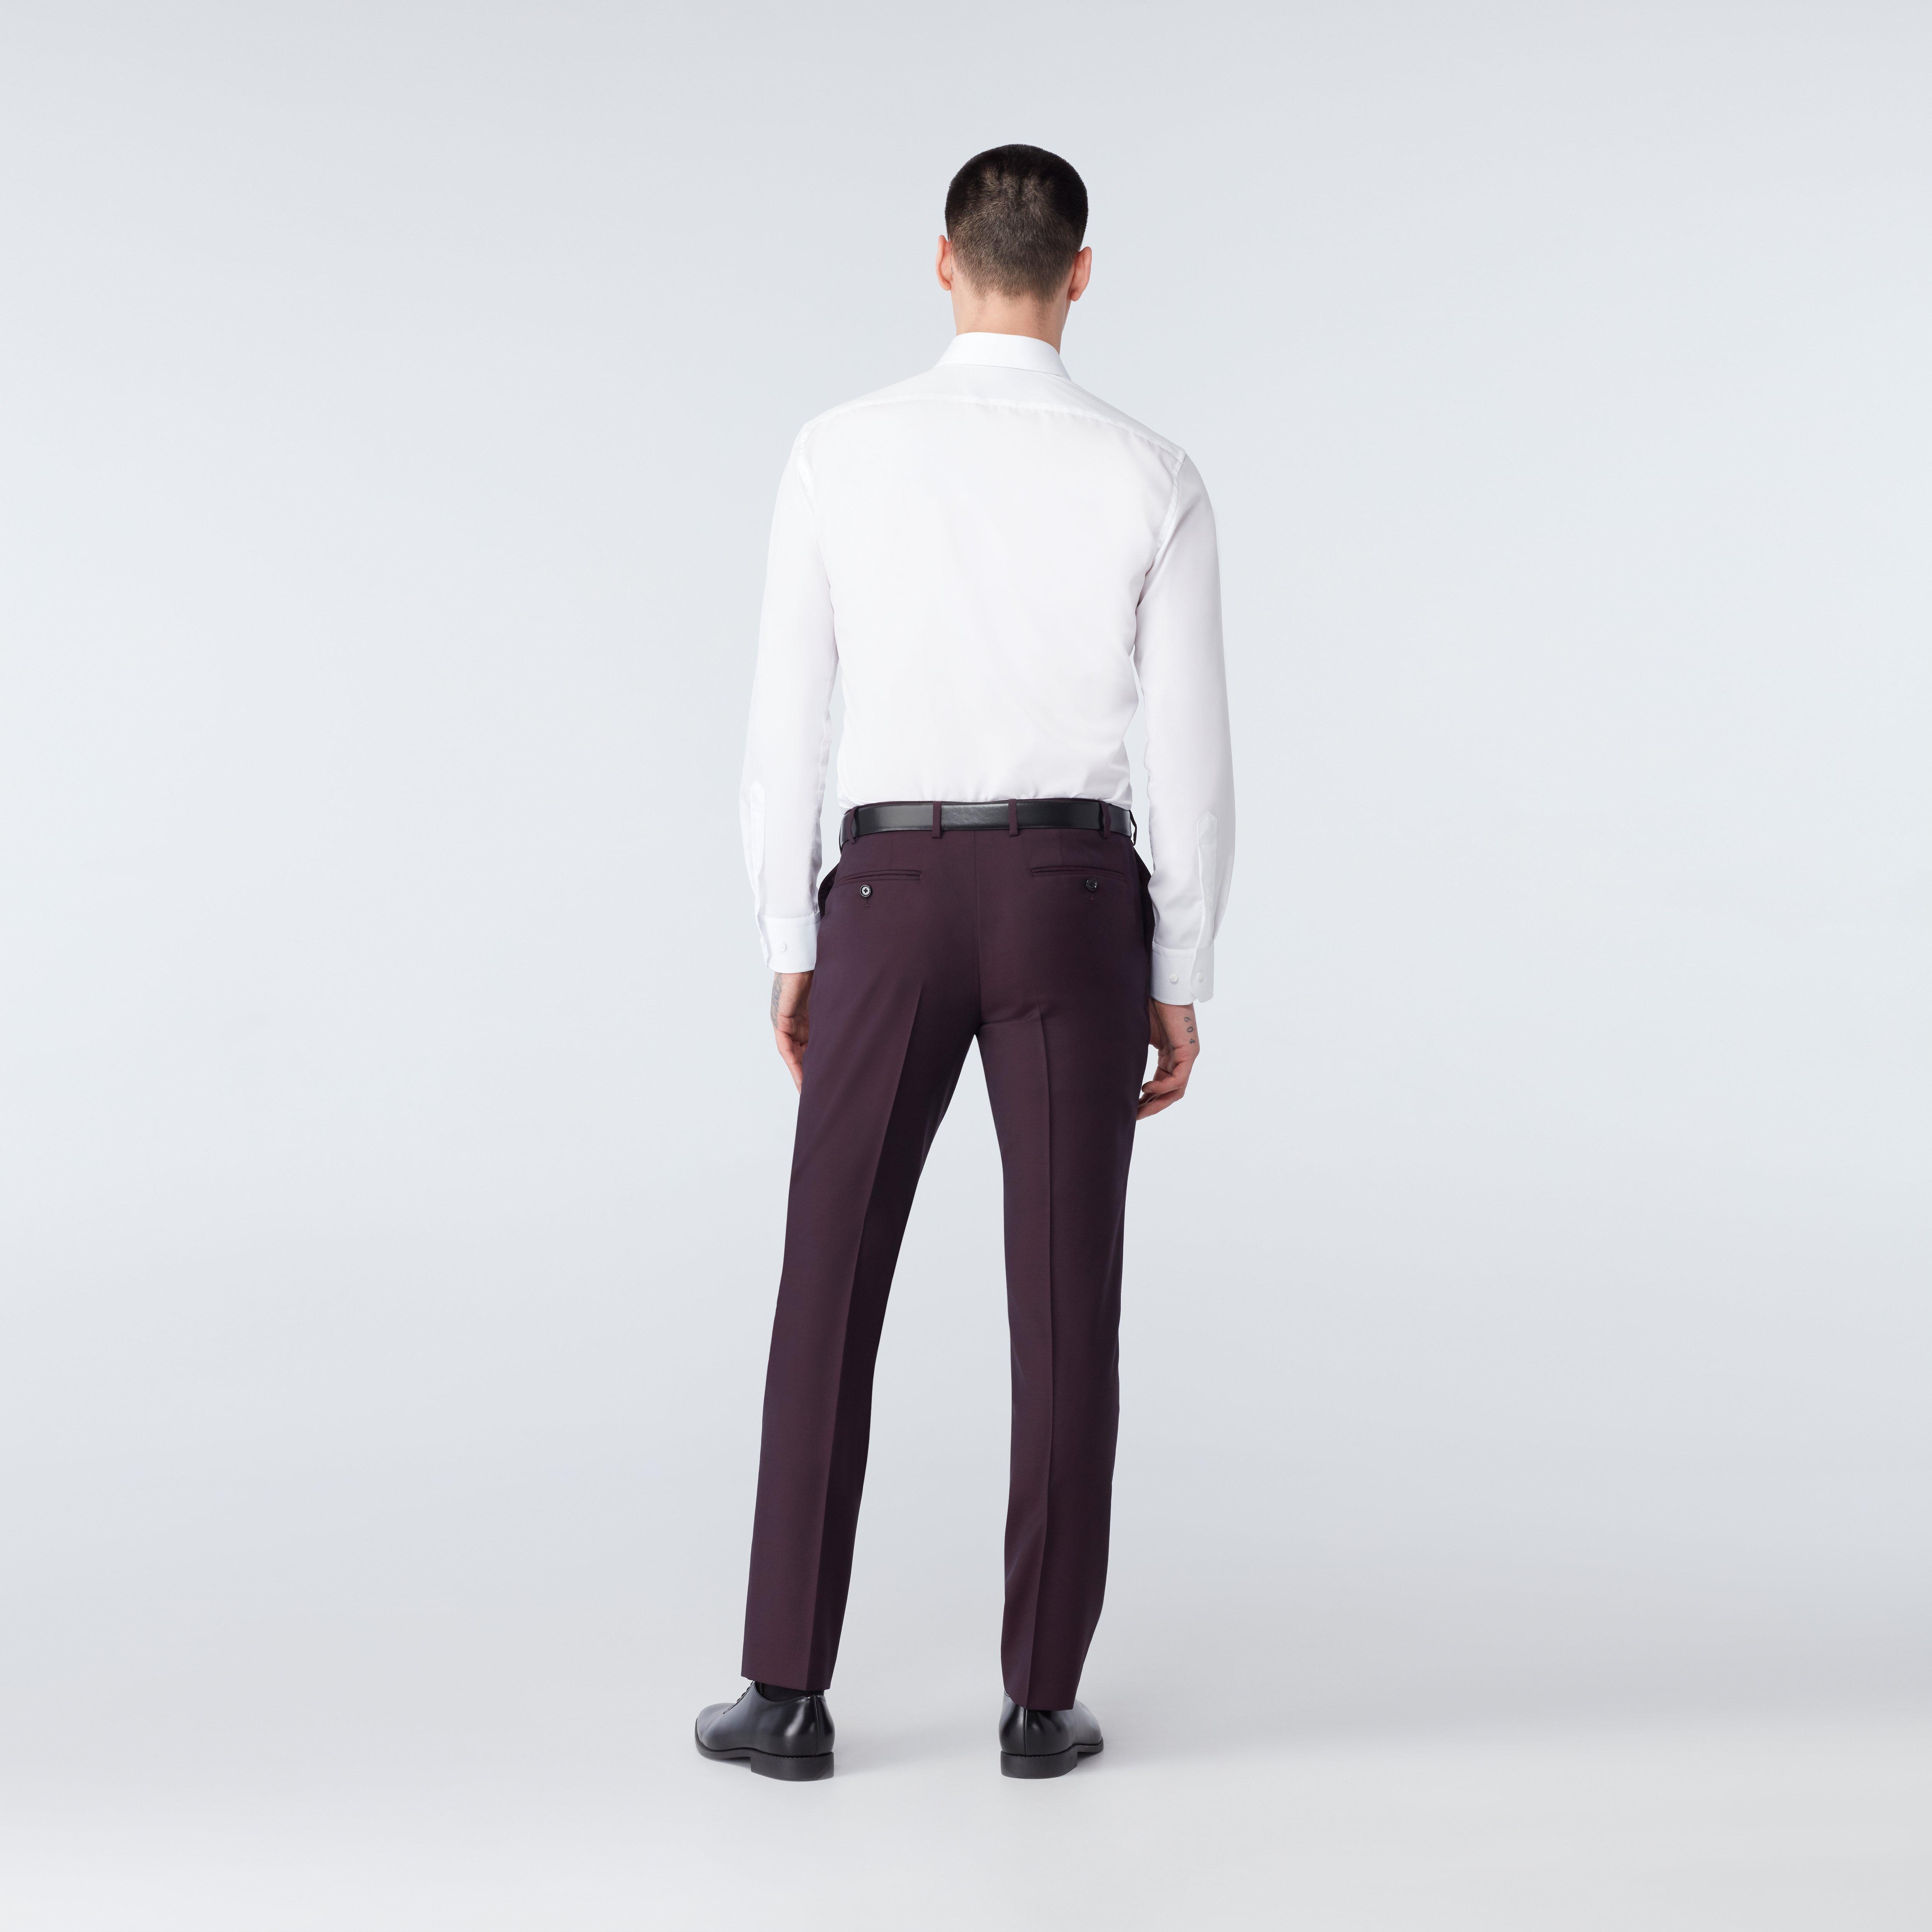 Custom Suits Made For You - Highworth Burgundy Suit | INDOCHINO